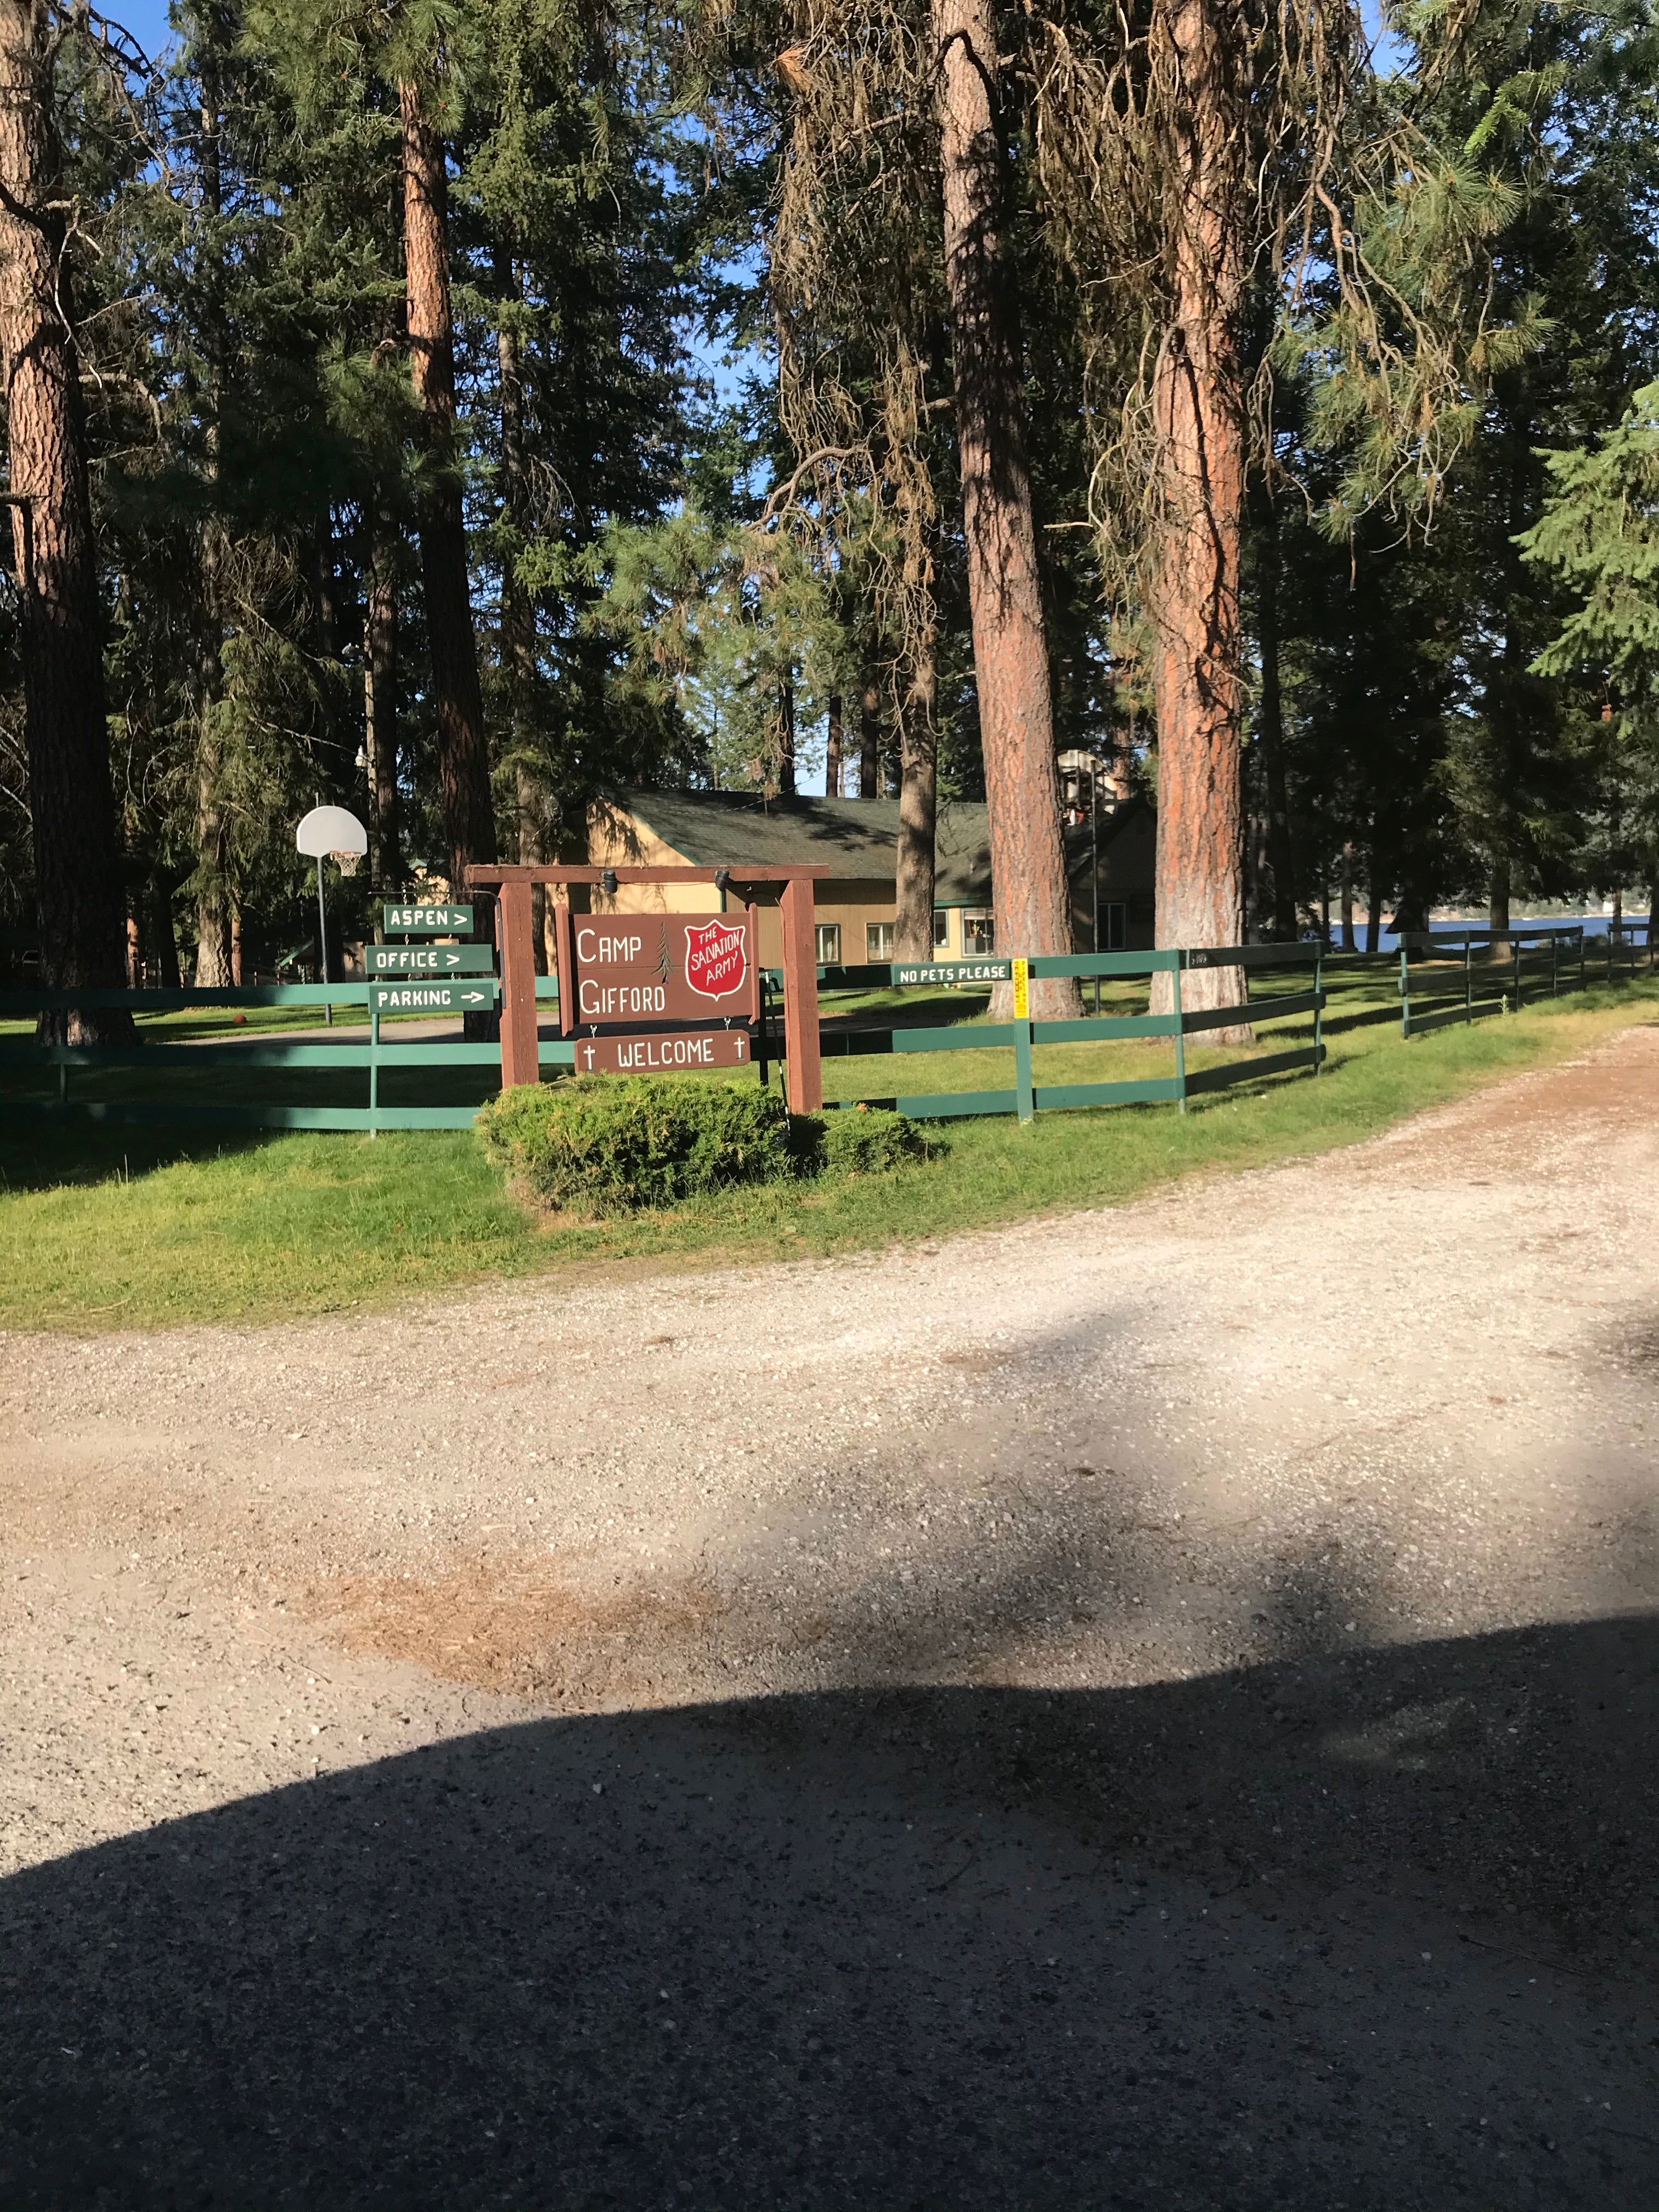 Camper submitted image from Camp Gifford at Deer Lake - 1